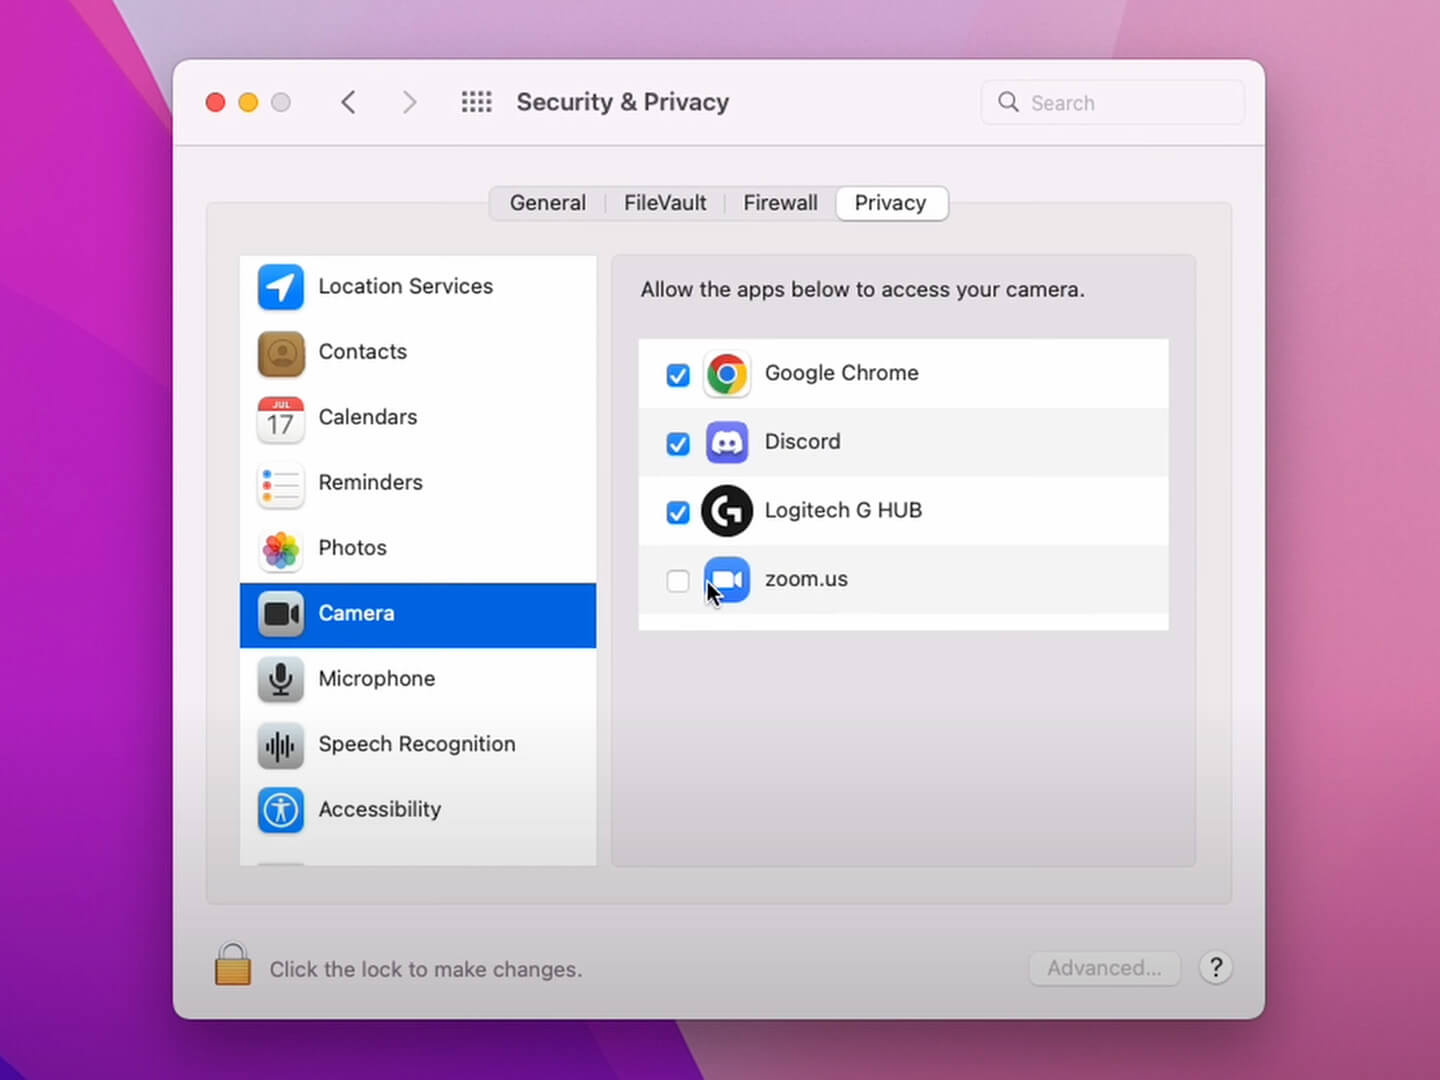 If you get a black screen when you turn on your webcam, check the Security and Privacy system preferences first